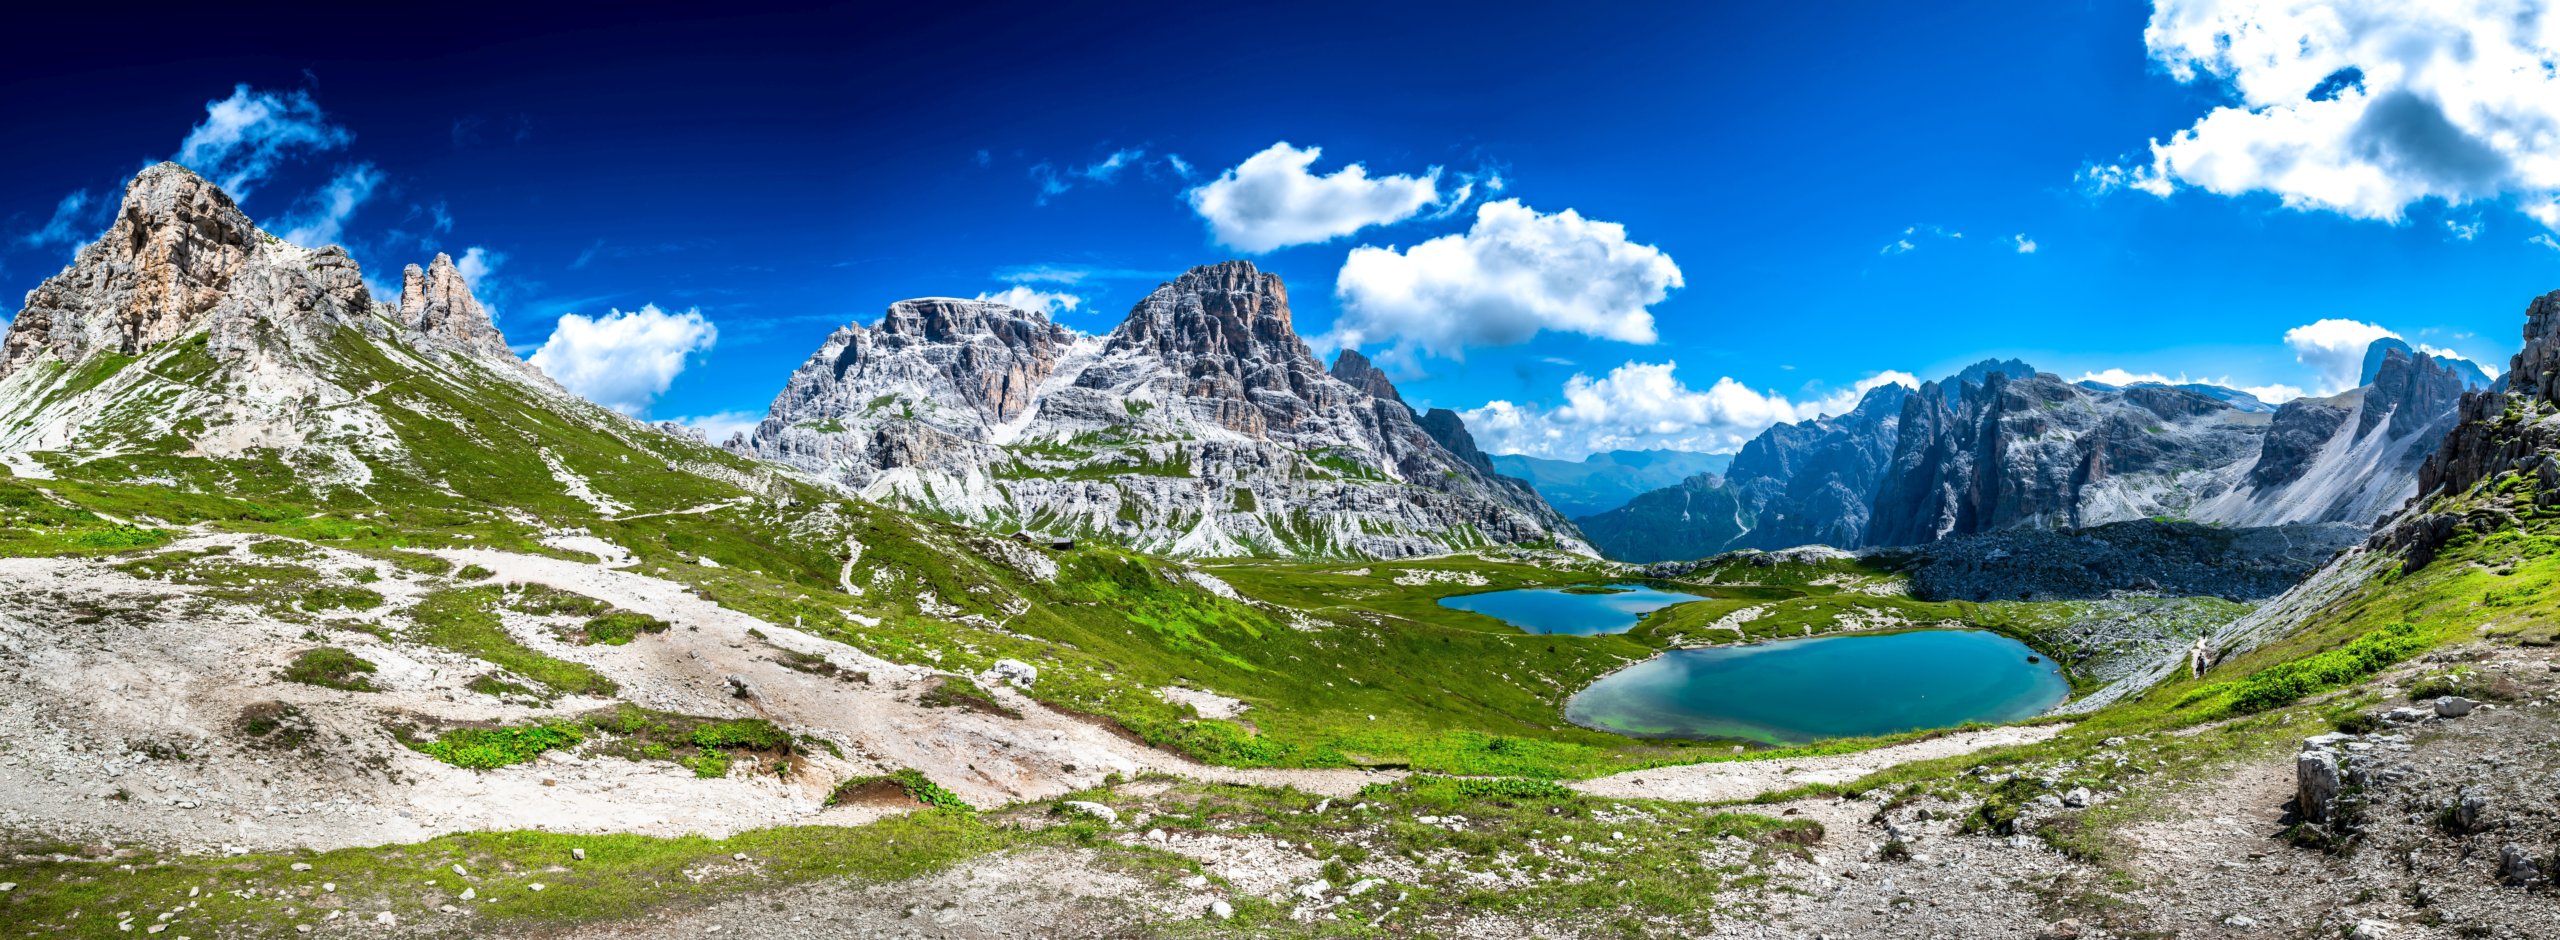 Alpine,Landscape,With,Mountain,Peaks,And,Clear,Lakes,At,The